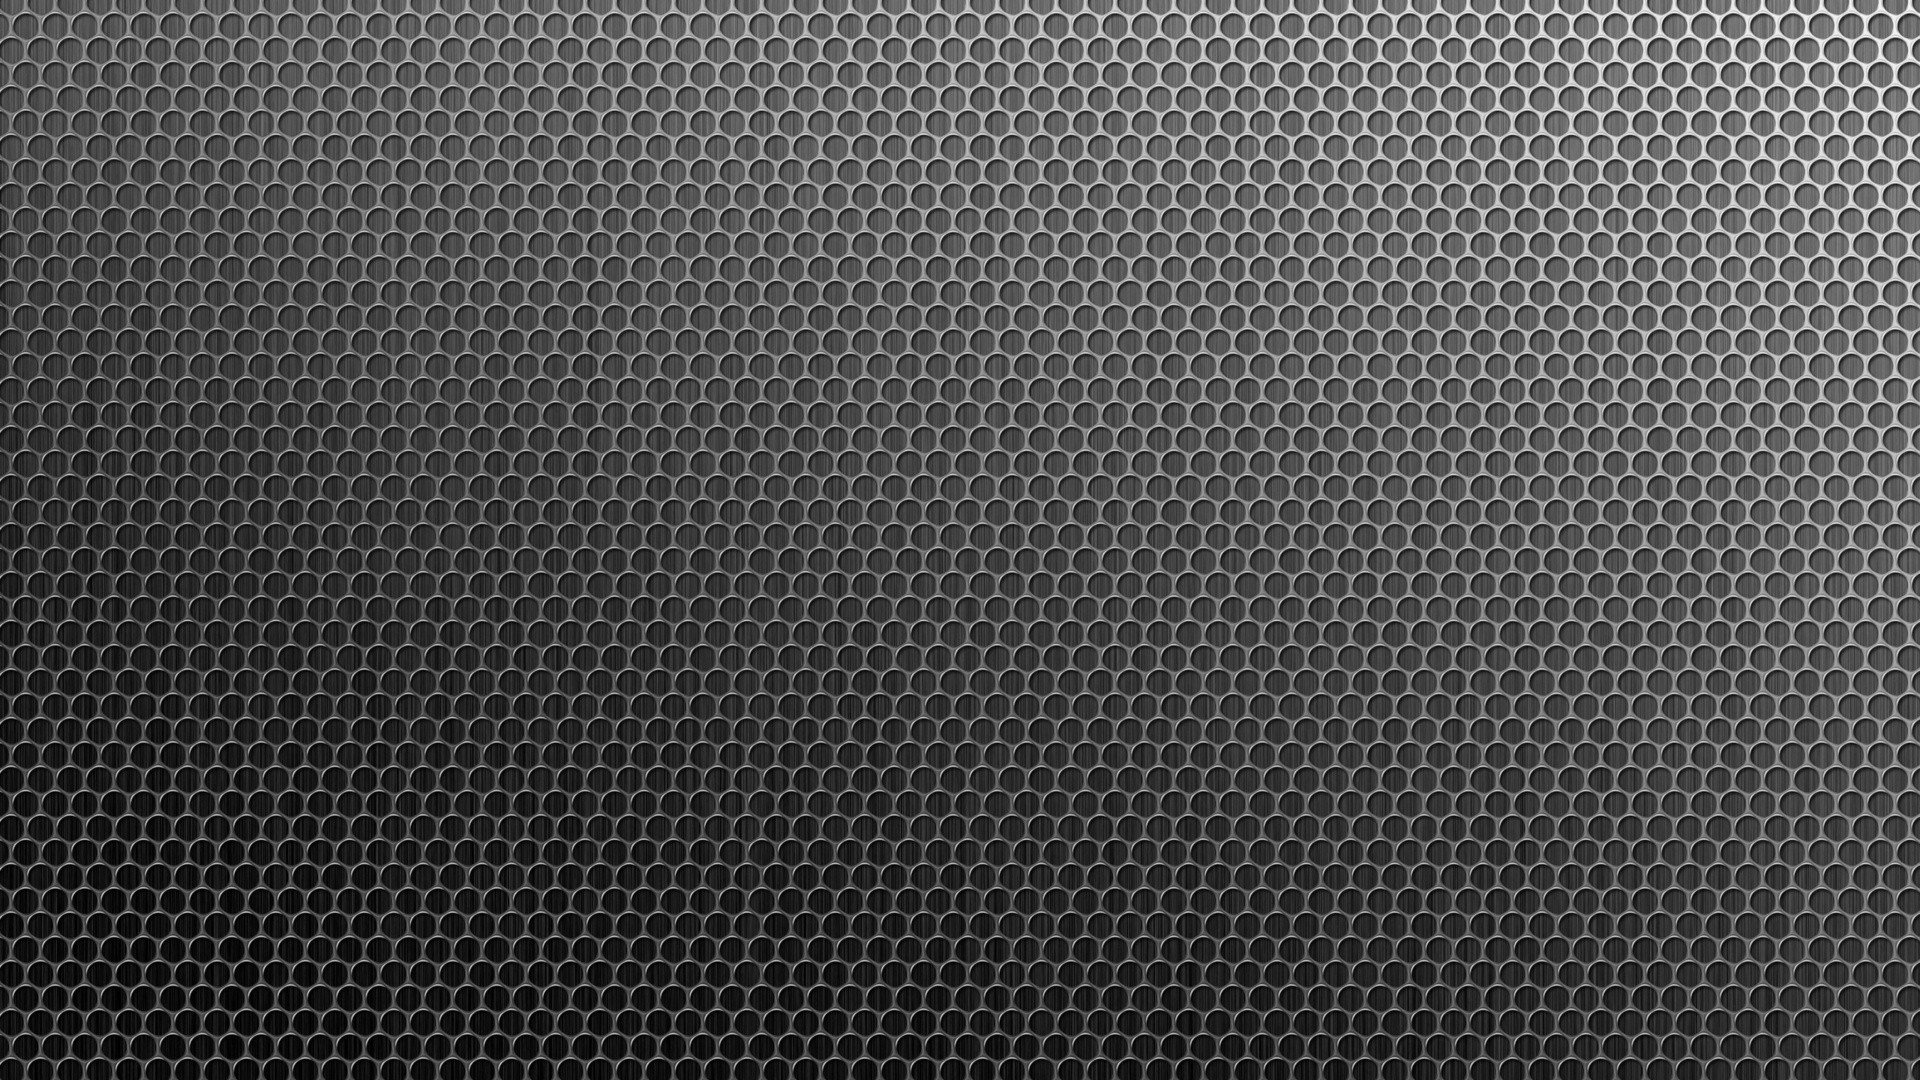 Perforated Metal 758338 - WallDevil